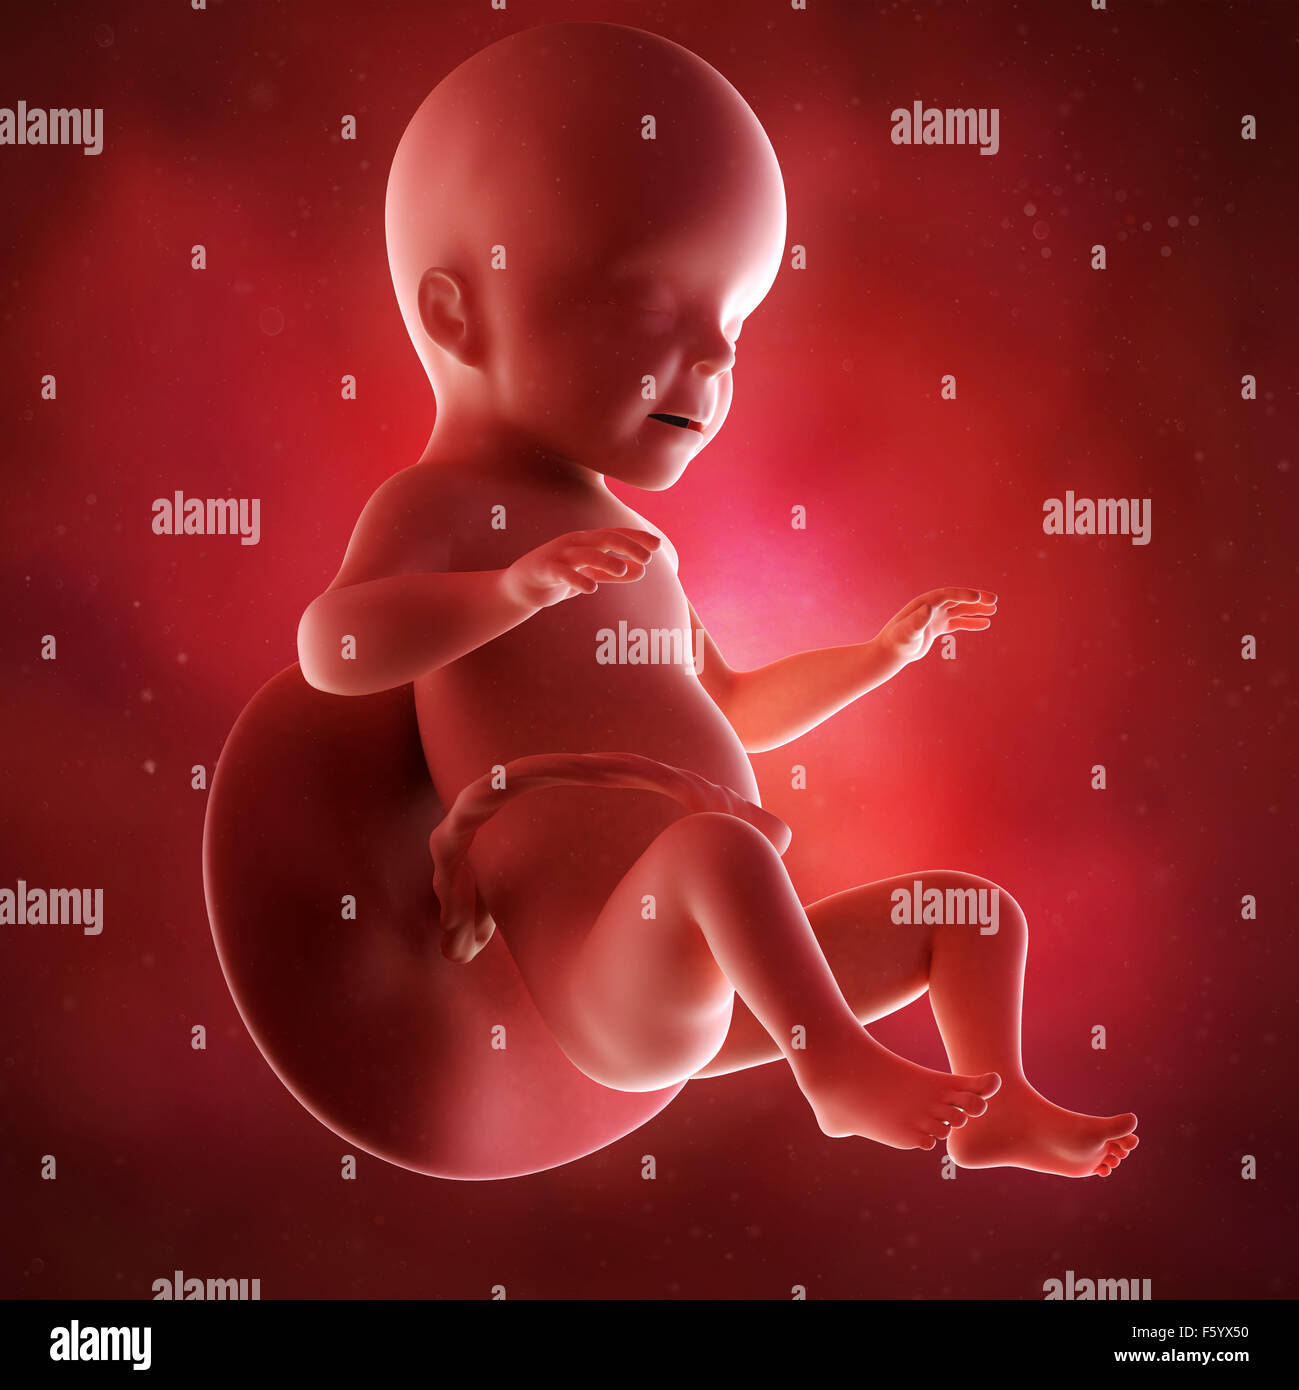 medical accurate 3d illustration of a fetus week 26 Stock Photo